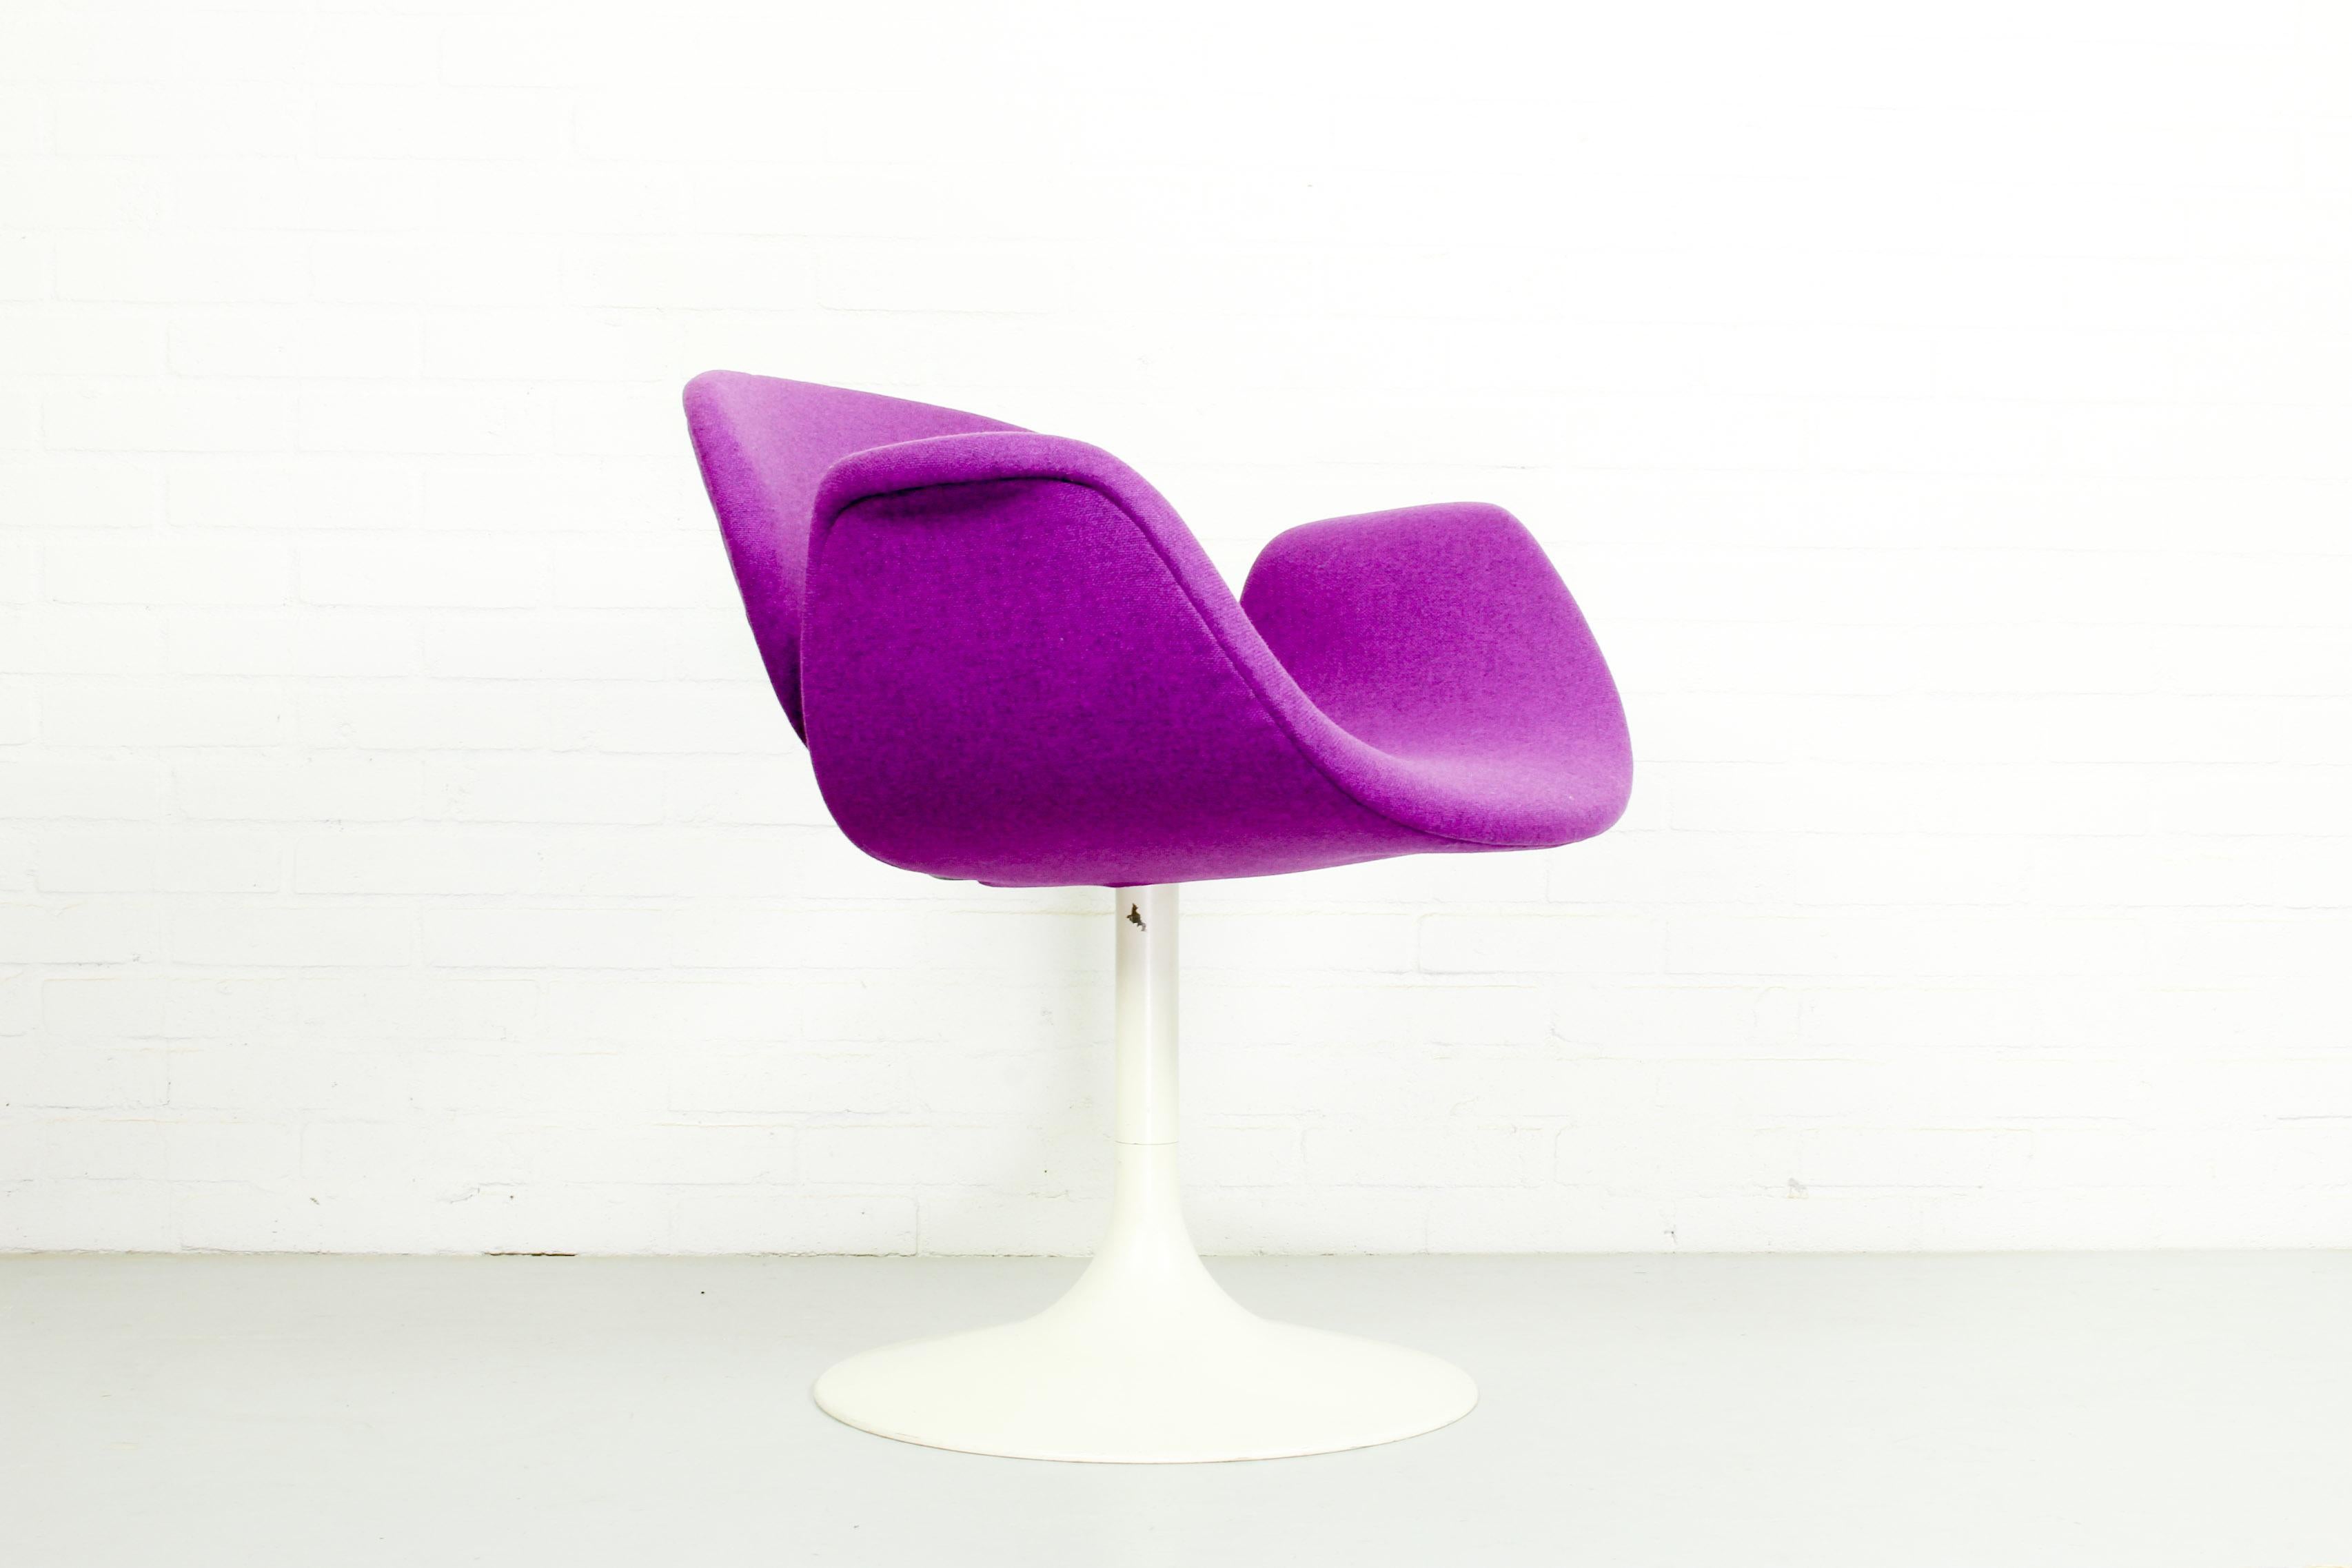 Like all Pierre Paulin’s designs this early little tulip chair is very sculptural. This chair has a very rare early tulip pedestral base. The chair has been newly upholstered with Kvadrat Tonica in a very nice purple color and is ready for another